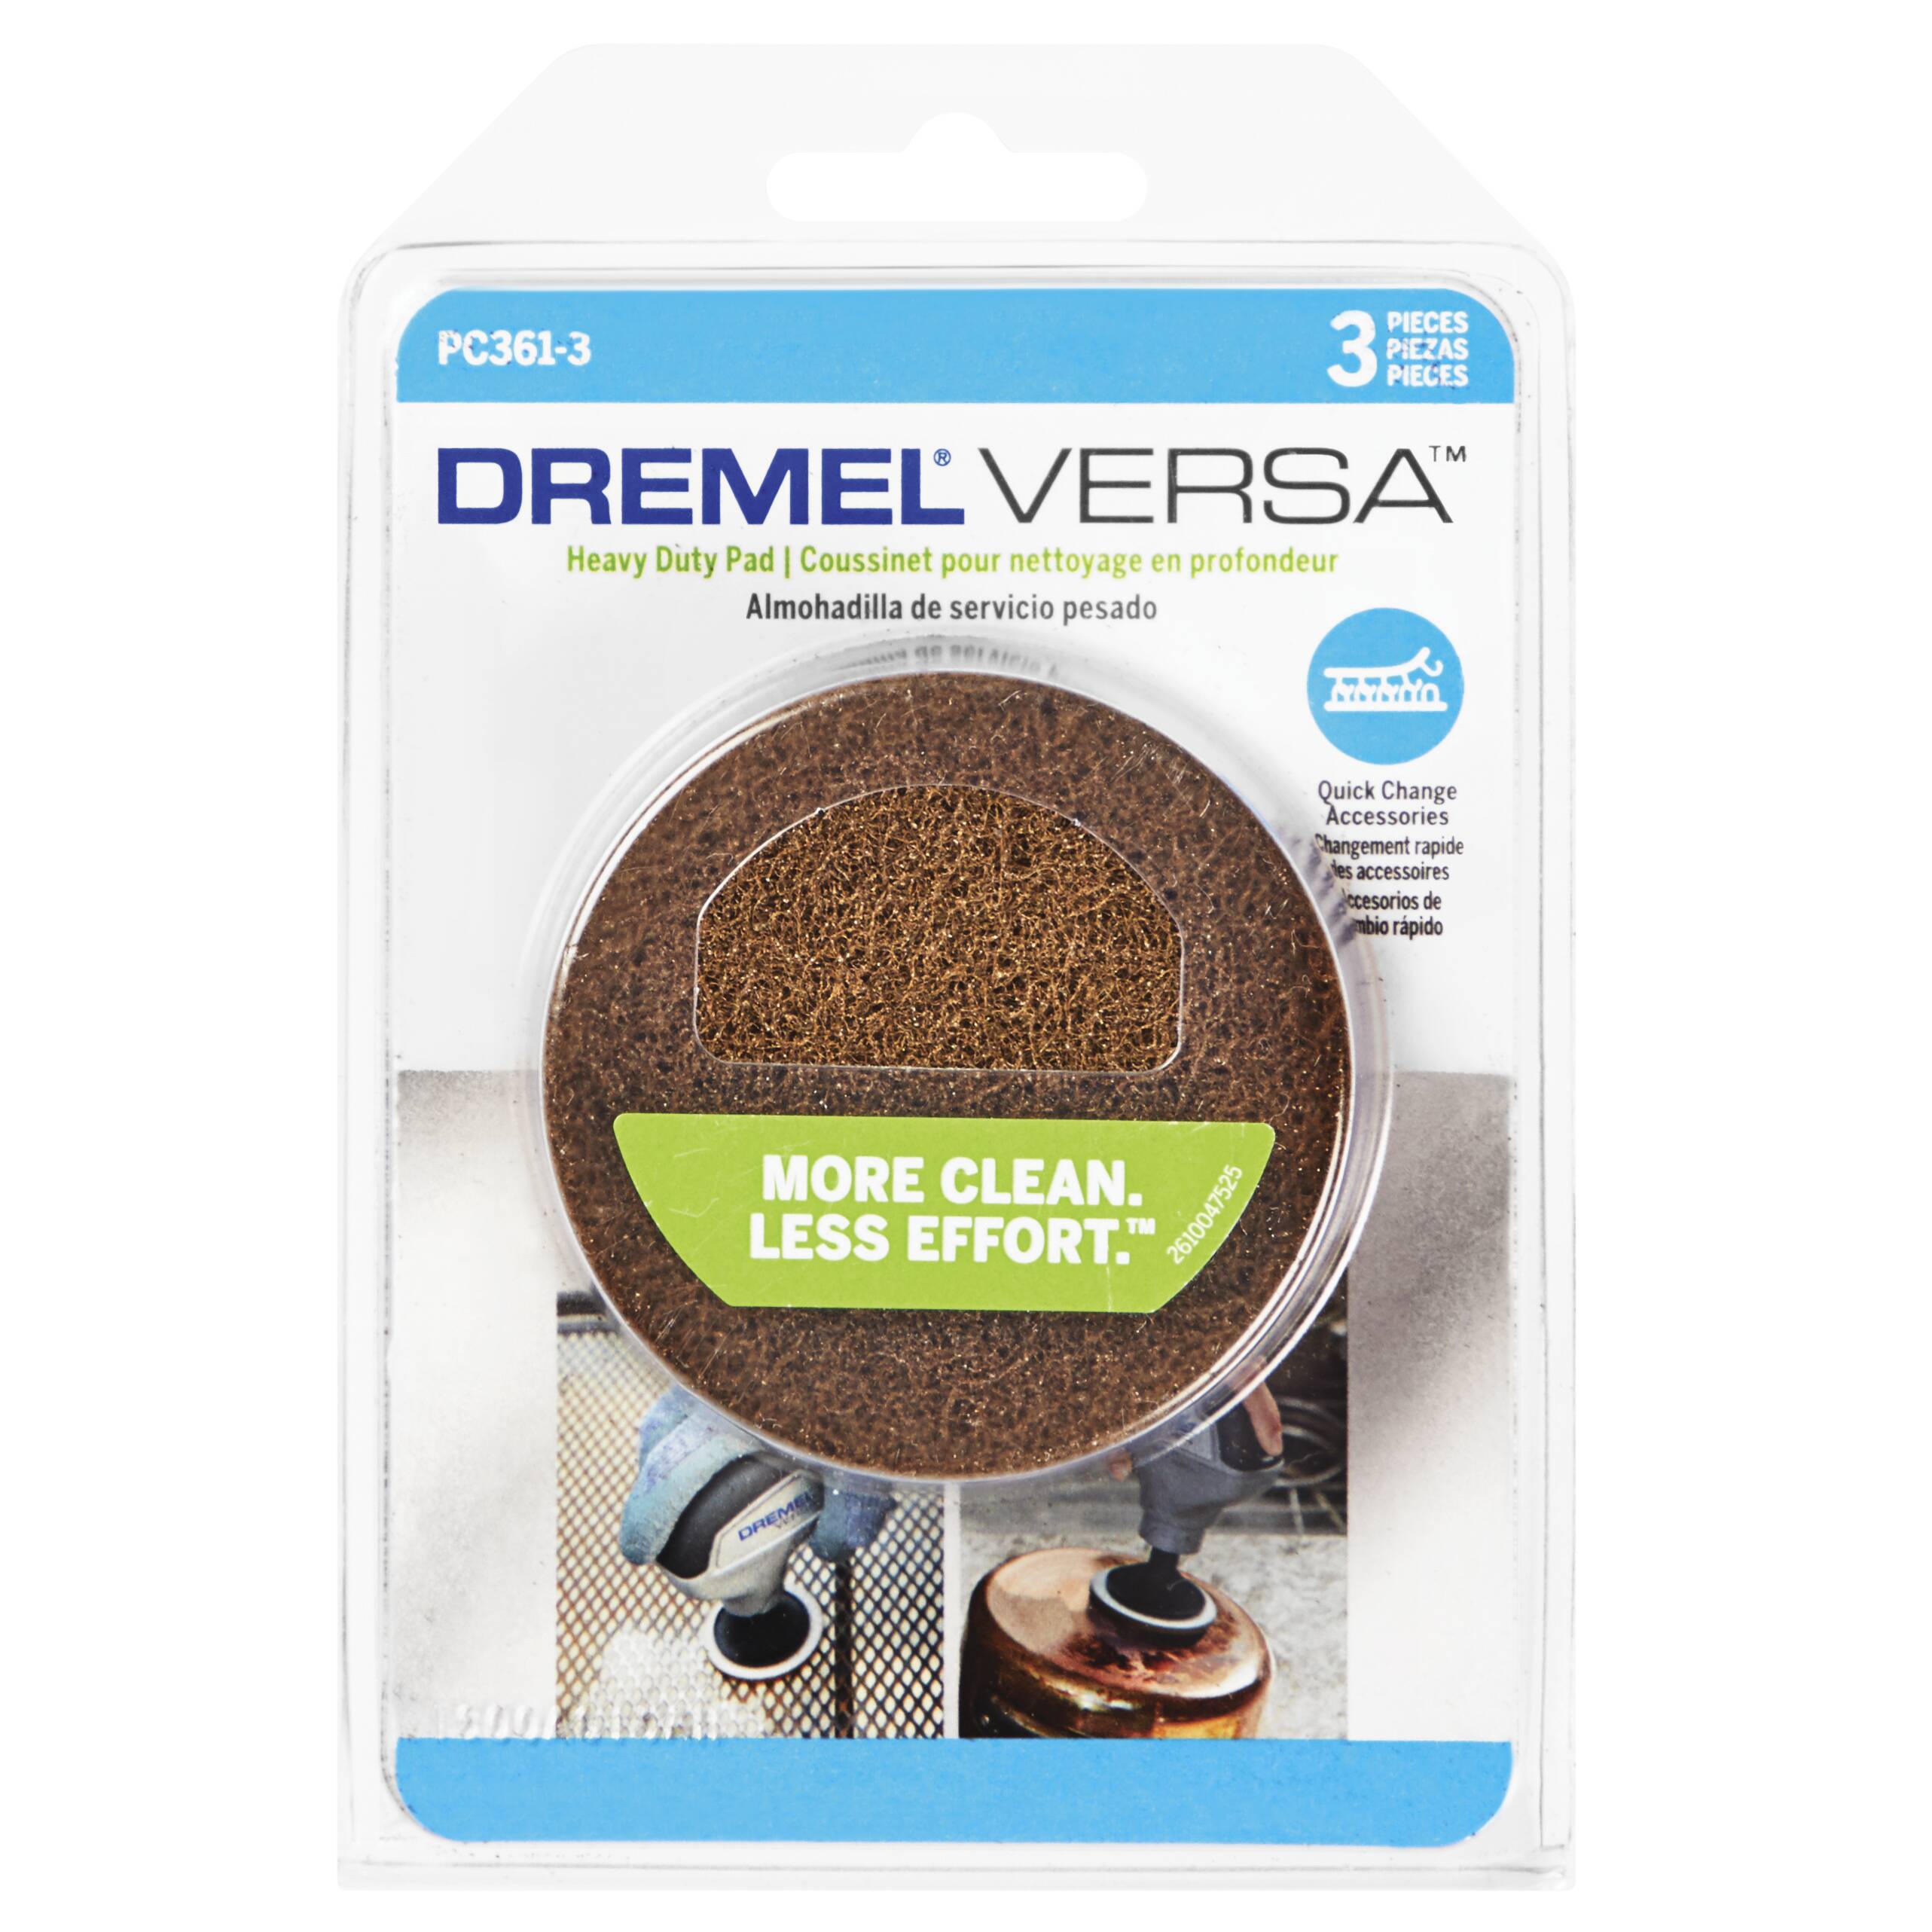  Dremel Versa PC10 High-Speed Power Cleaner Kit, Cordless  Cleaning Tool/Spin Scrubber with 9 Multi-Purpose Cleaning Pads, Bristle  Brush and Splash Guard for Faster, Easier Cleaning and Scrubbing : Tools &  Home